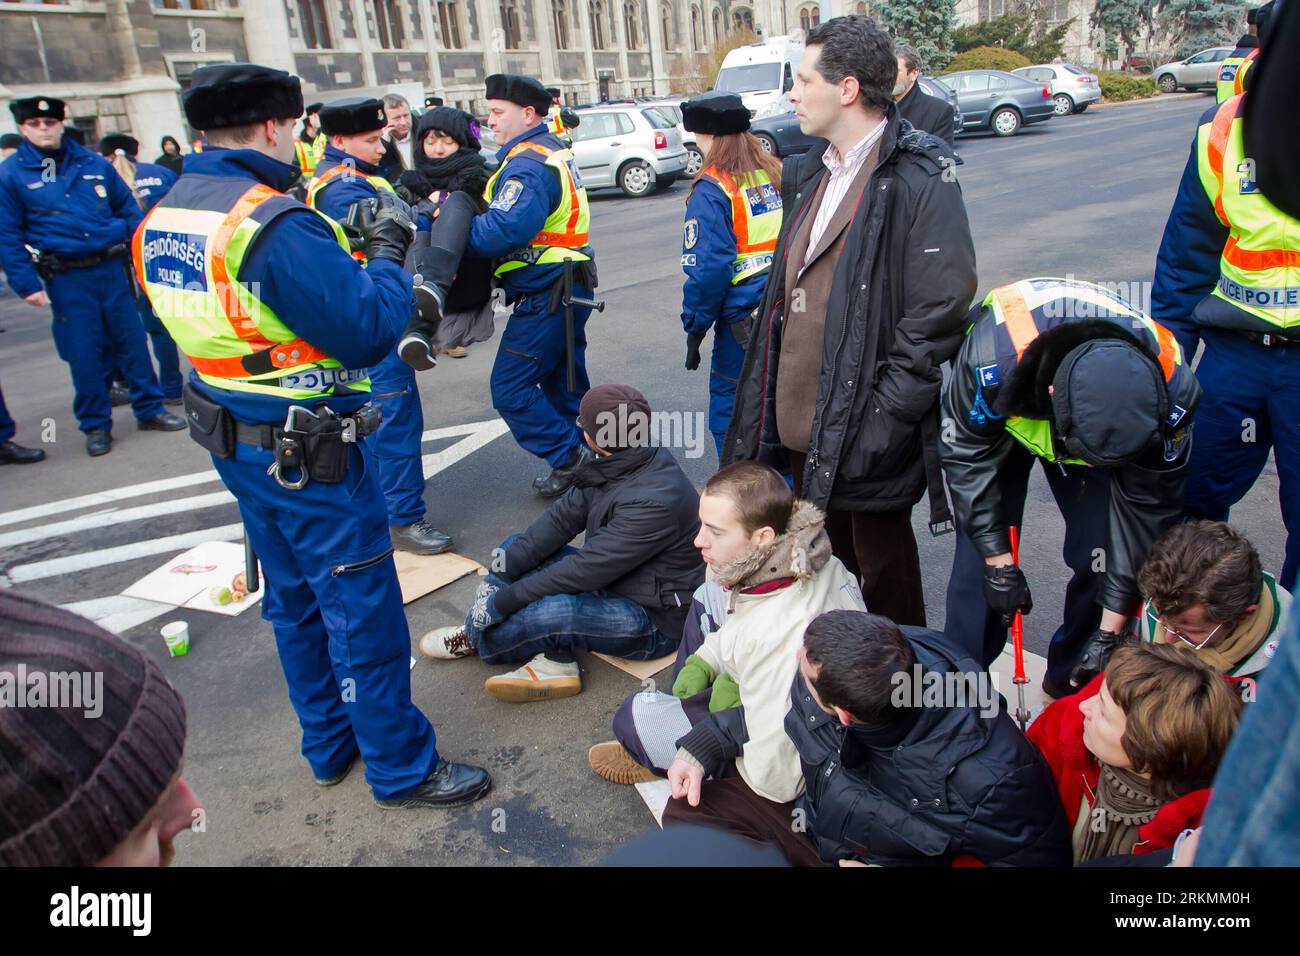 Bildnummer: 56784144  Datum: 23.12.2011  Copyright: imago/Xinhua (111223) -- BUDAPEST, Dec. 23, 2011 (Xinhua) -- Members of the Hungarian opposition green Politics Can Be Different party are arrested during an anti-government demonstration in front of the Hungarian Parliament in Budapest, Hungary, on Dec. 23, 2011. Former Hungarian Prime Minister Ferenc Gyurcsany and several other leading opposition politicians were released shortly after their arrests following an anti-government demonstration outside the parliament on Friday. (Xinhua/Attila Volgyi) (zjl) HUNGARY-BUDAPEST-PROTEST-FORMER PM-AR Stock Photo